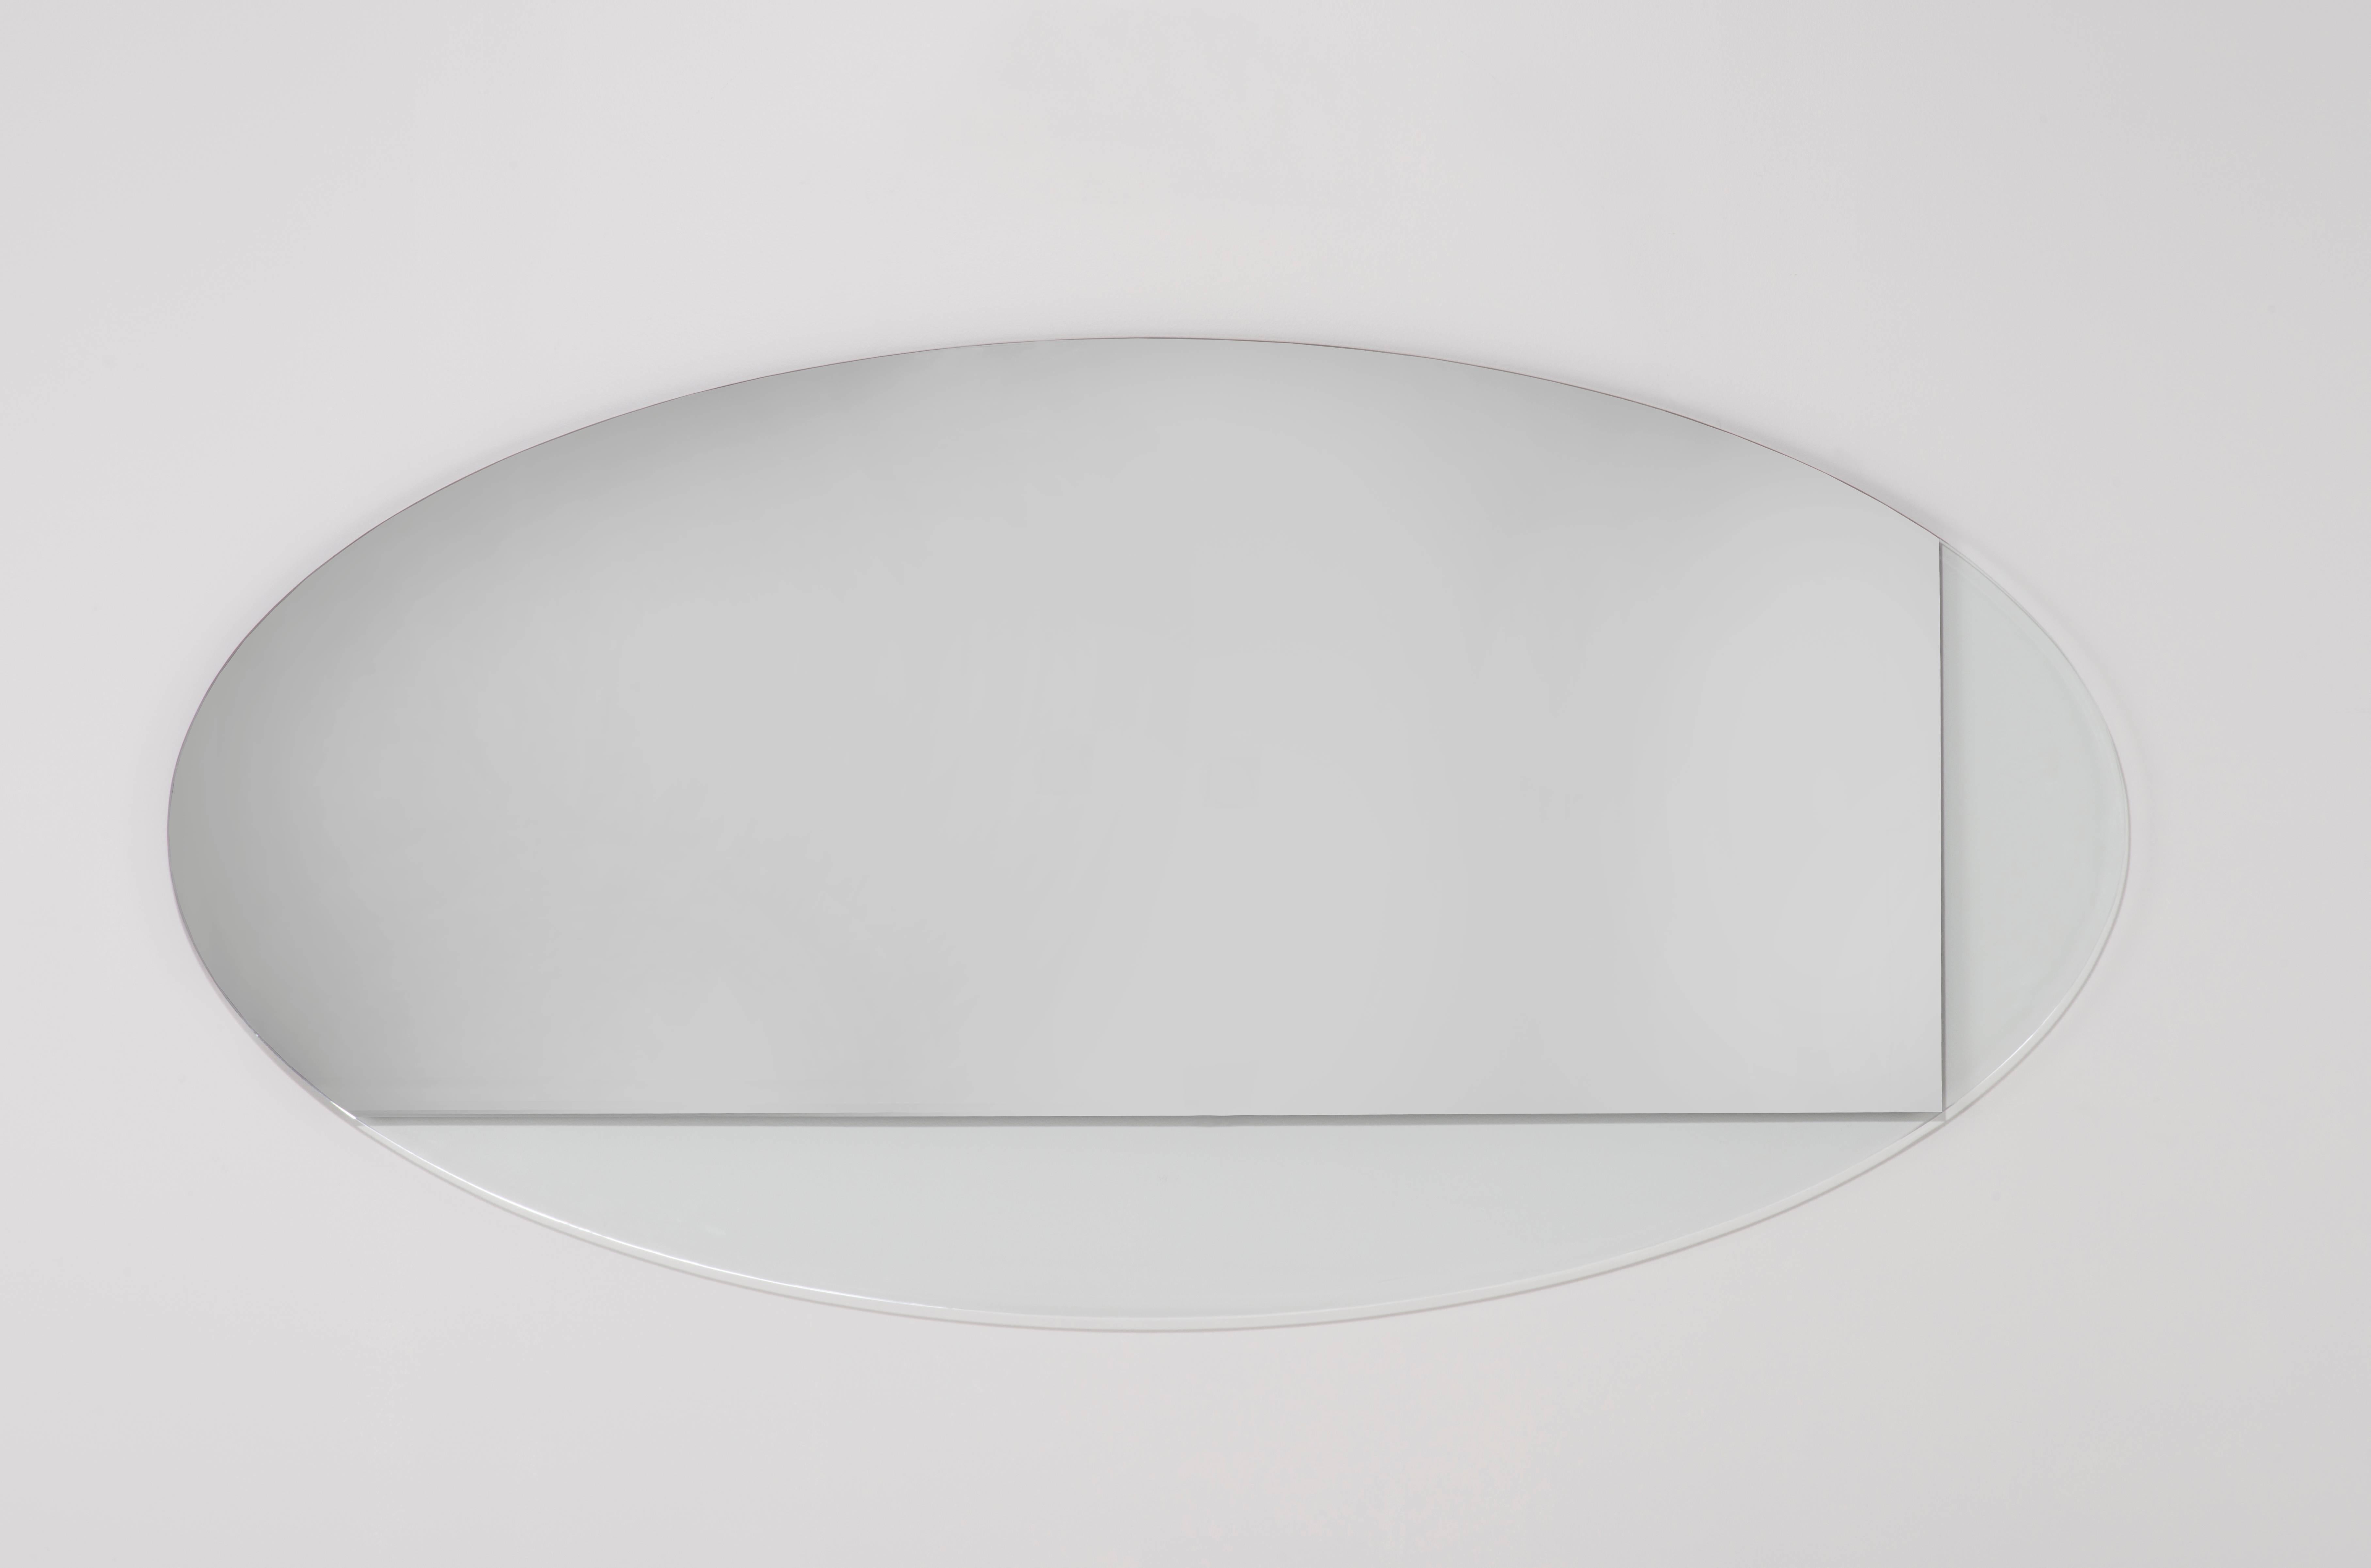 The Ida Oval is a large-scale oval mirror that partners mirror with translucent glass, creating unexpected layers of light and reflection. The scale of this mirror makes for a perfect addition above a large piece of furniture, to extend the visual